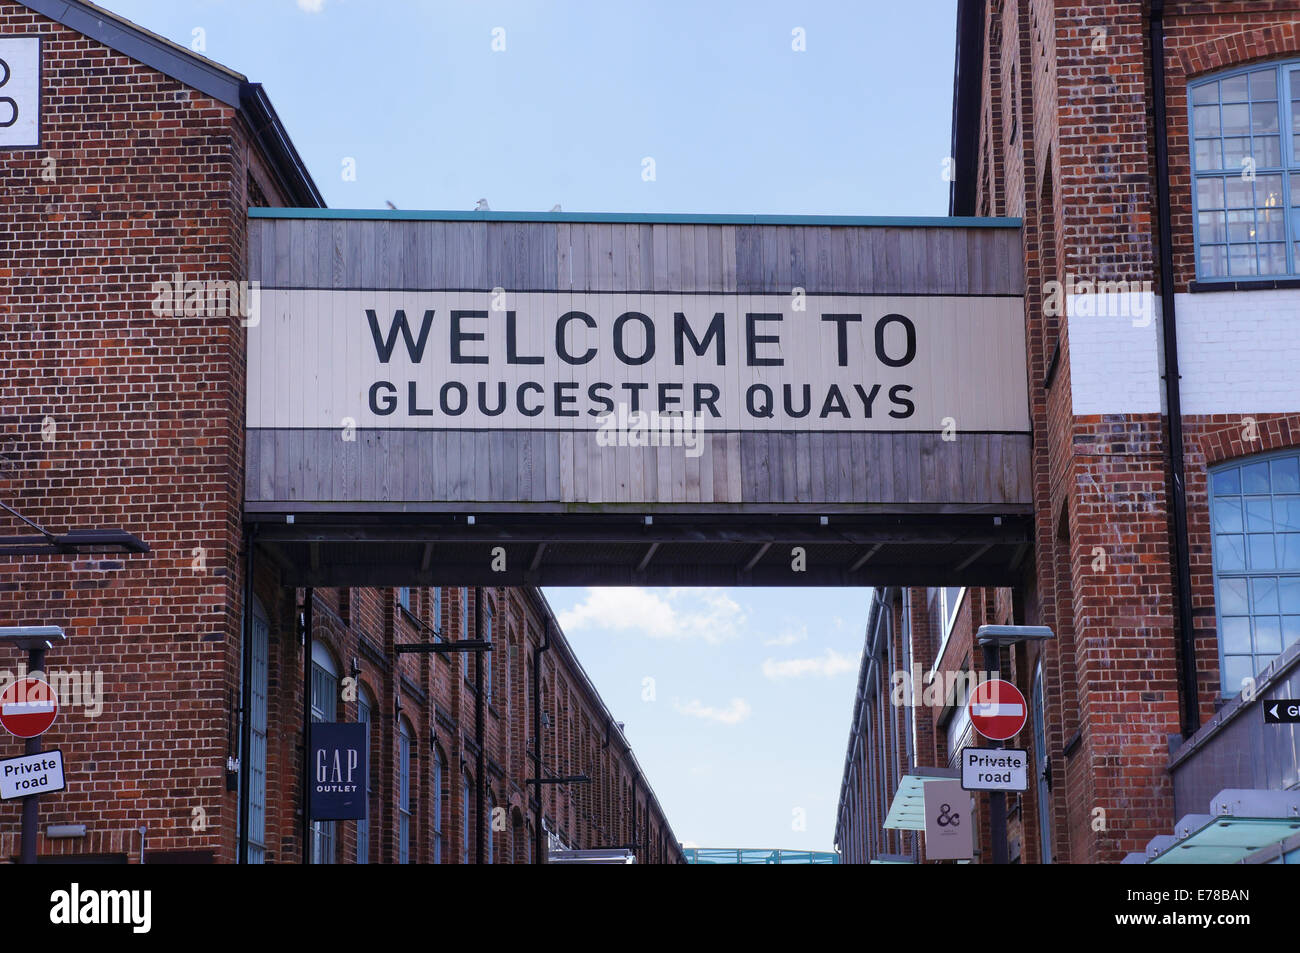 gloucester quays shopping outlet centre Stock Photo